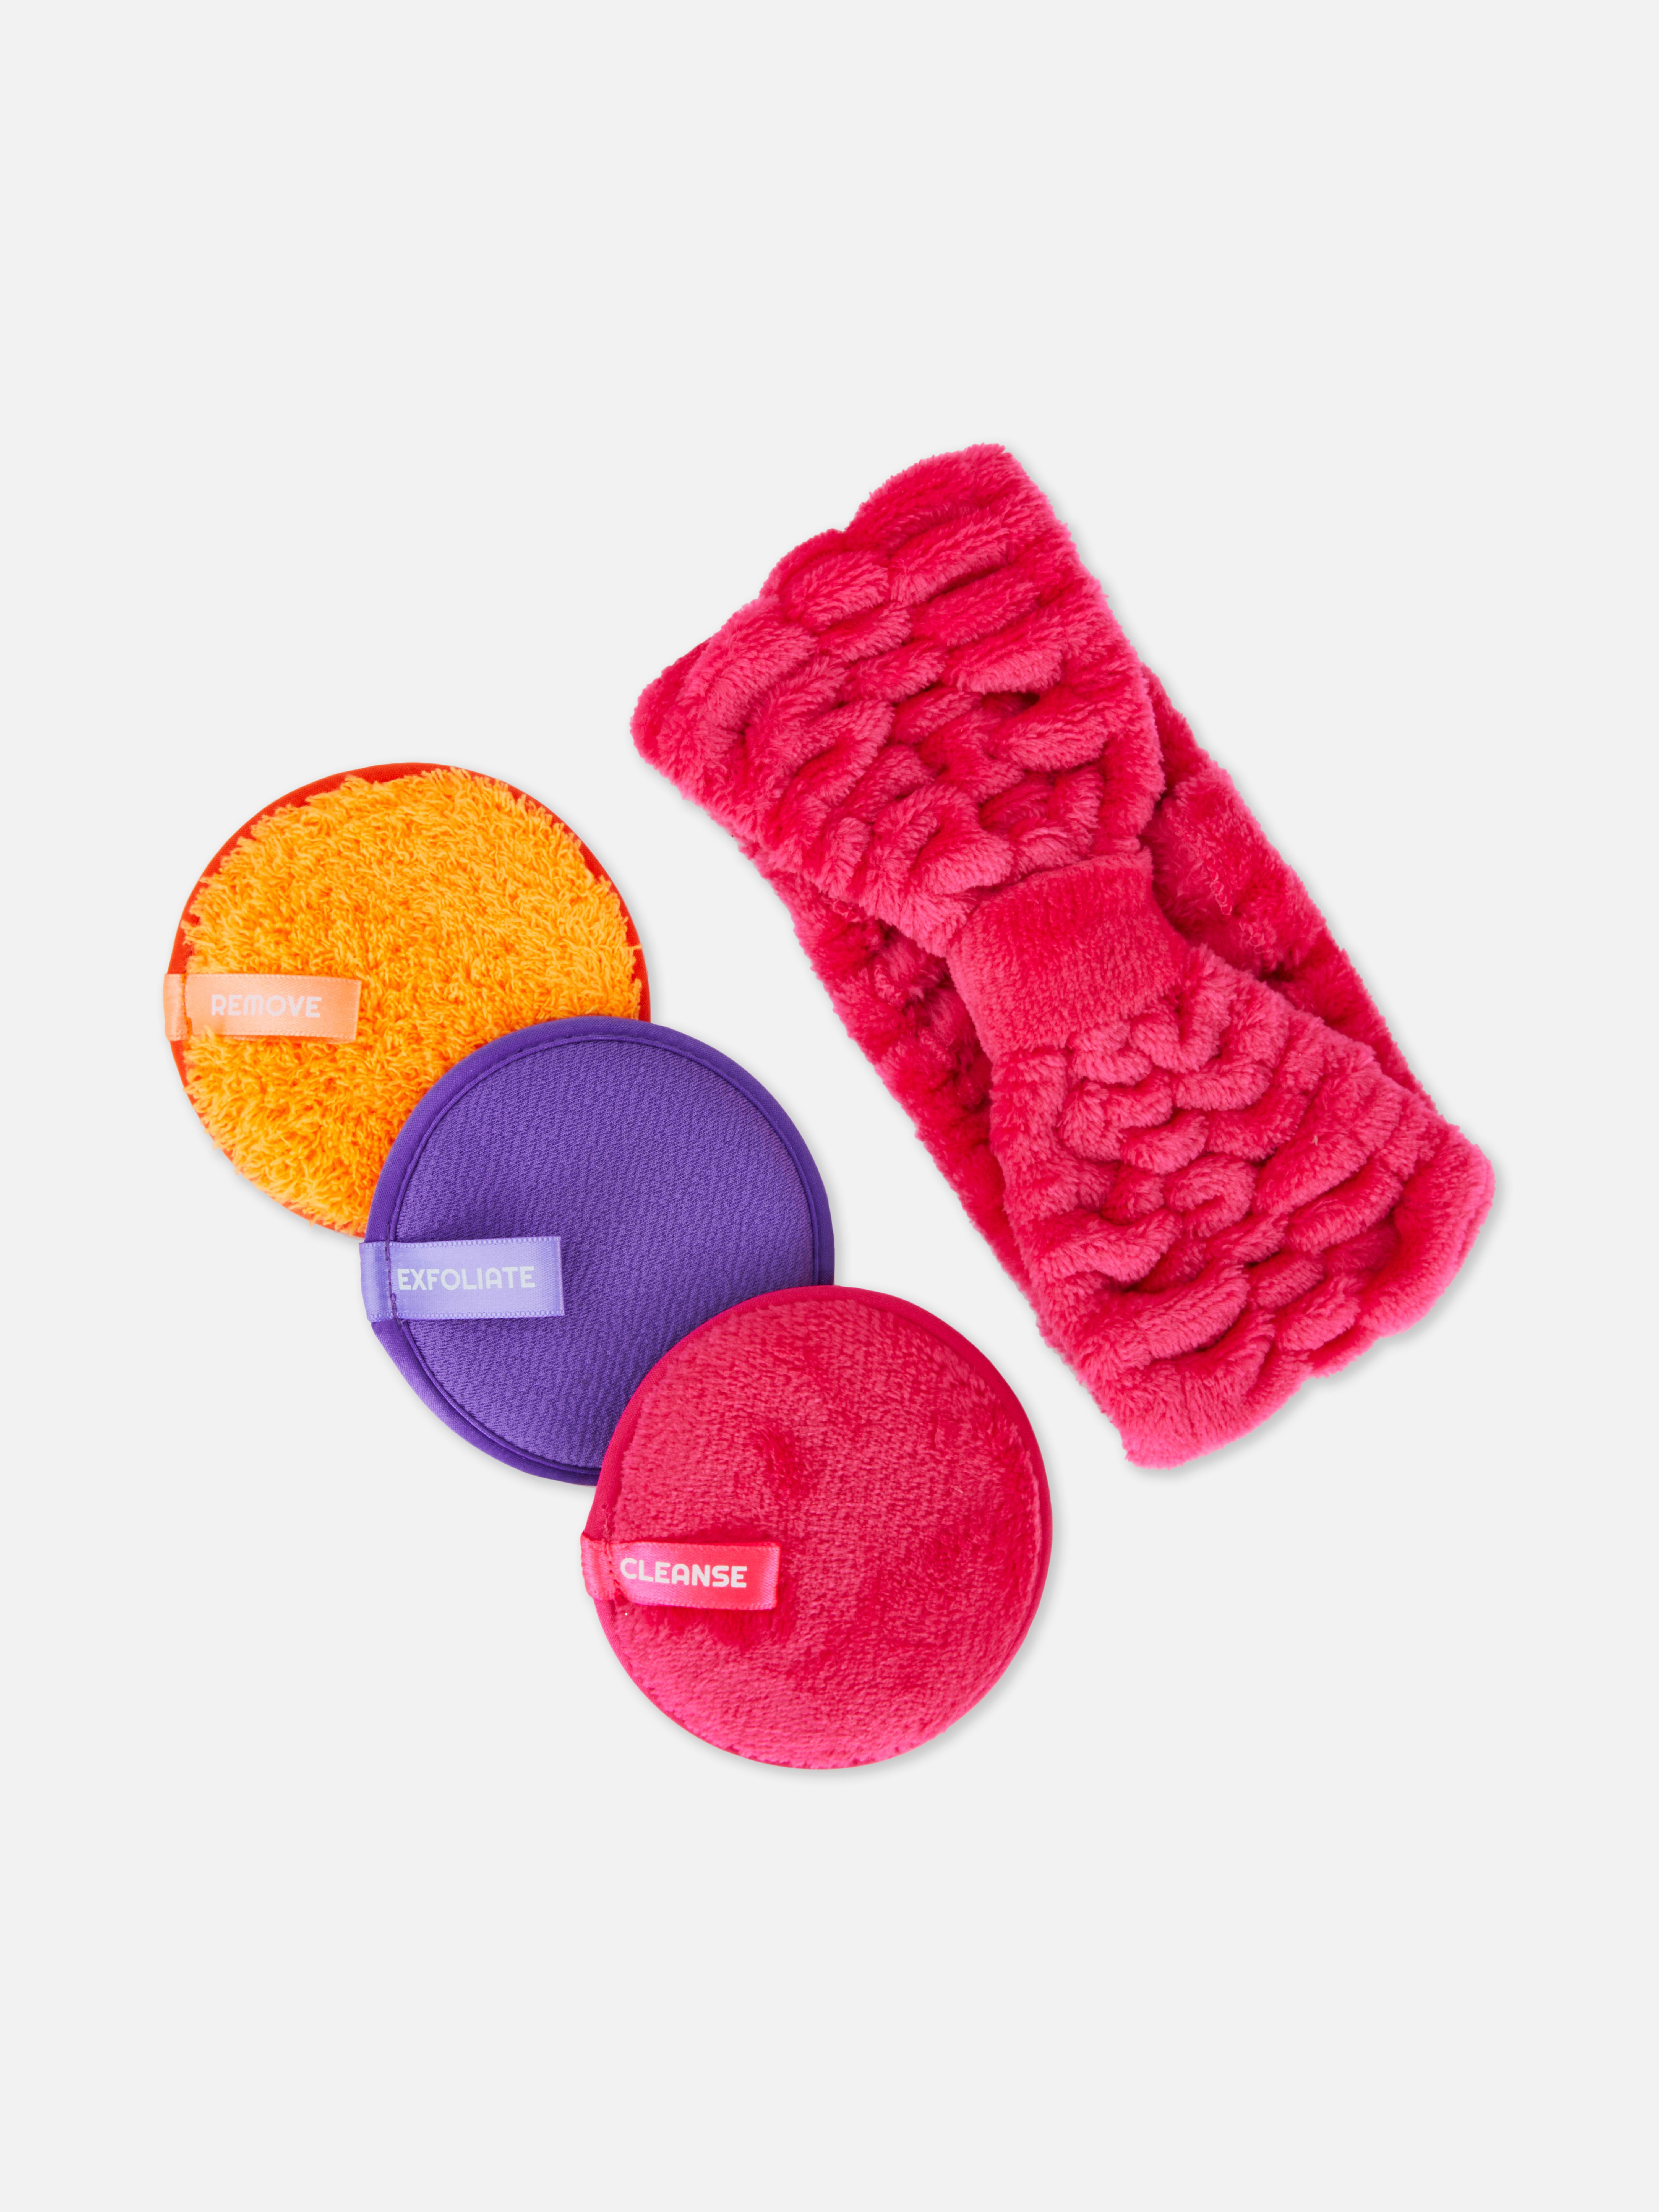 Facial Cleansing Pad and Headband Set